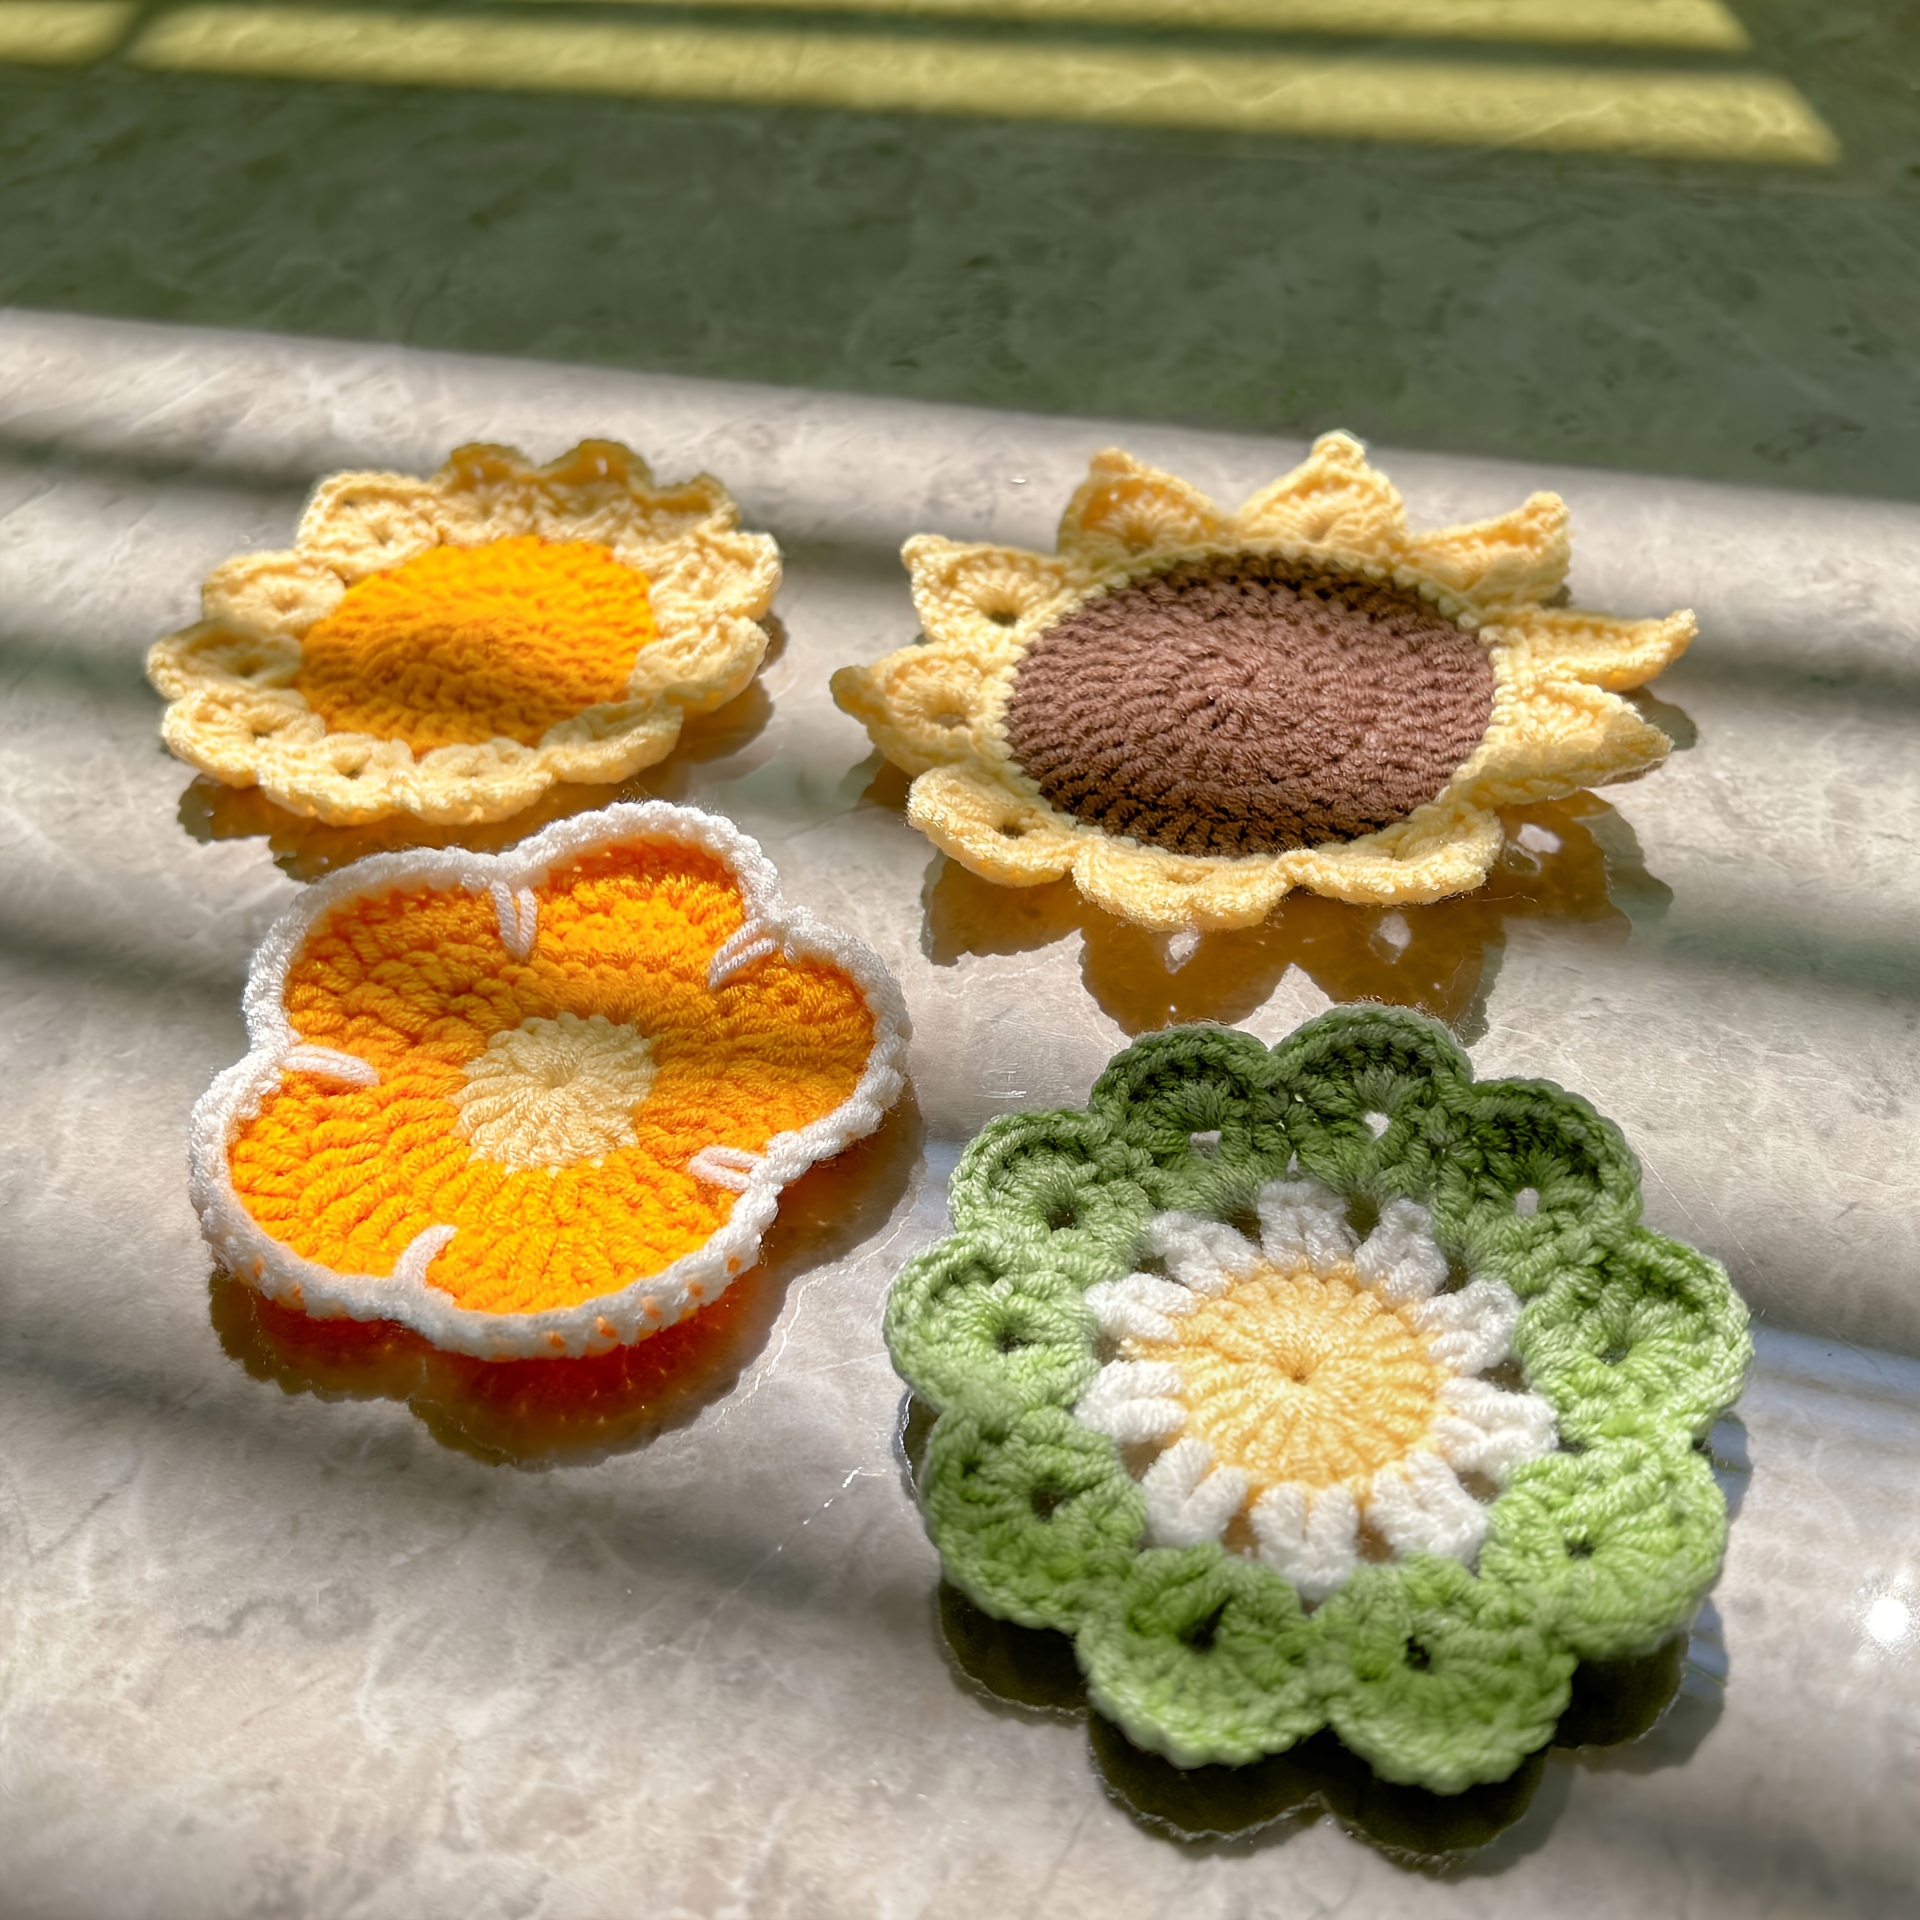 

4pcs, Coasters, Handmade Sunflower Coaster, Pure Handmade Wool Crochet Exquisite Coasters, Heat Insulation Mats, Meal Mats, Suitable For Cups Of Different Sizes, Room Decor